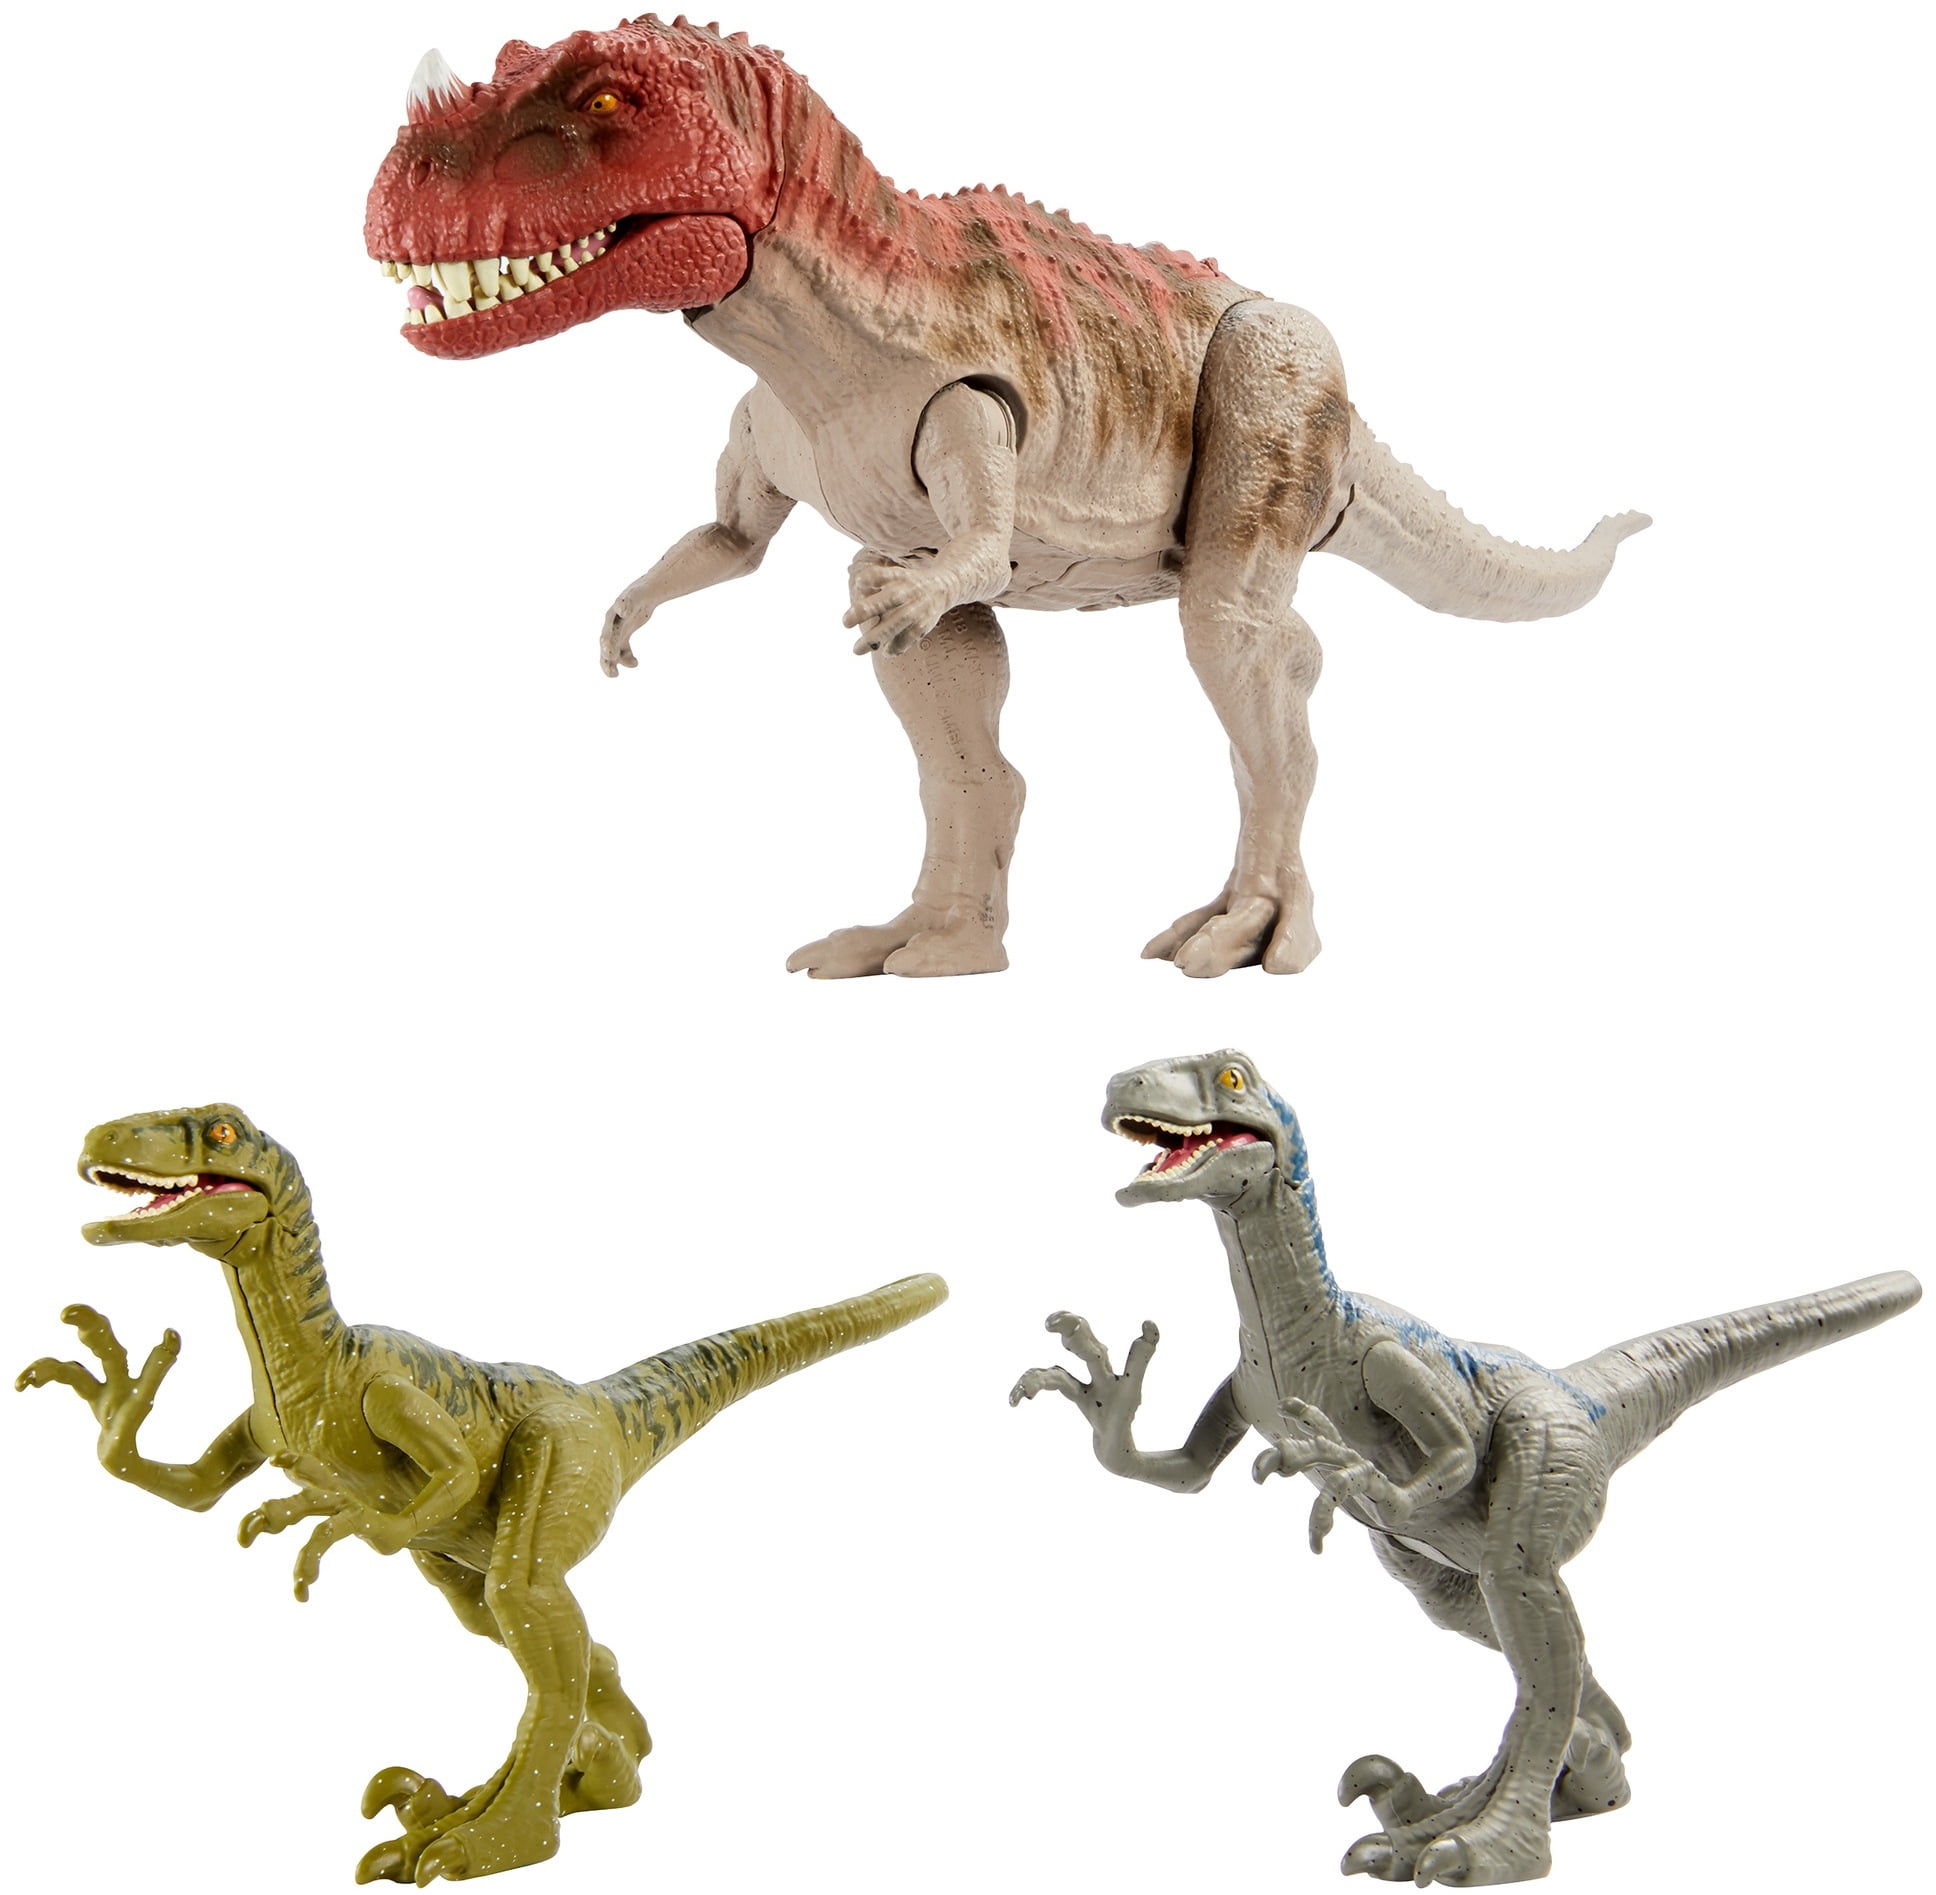 Authentic Decoration Movable Joints Jurassic World Extreme Chompin Spinosaurus Dinosaur Action Figure Ages 4 Years Old & Up Huge Bite